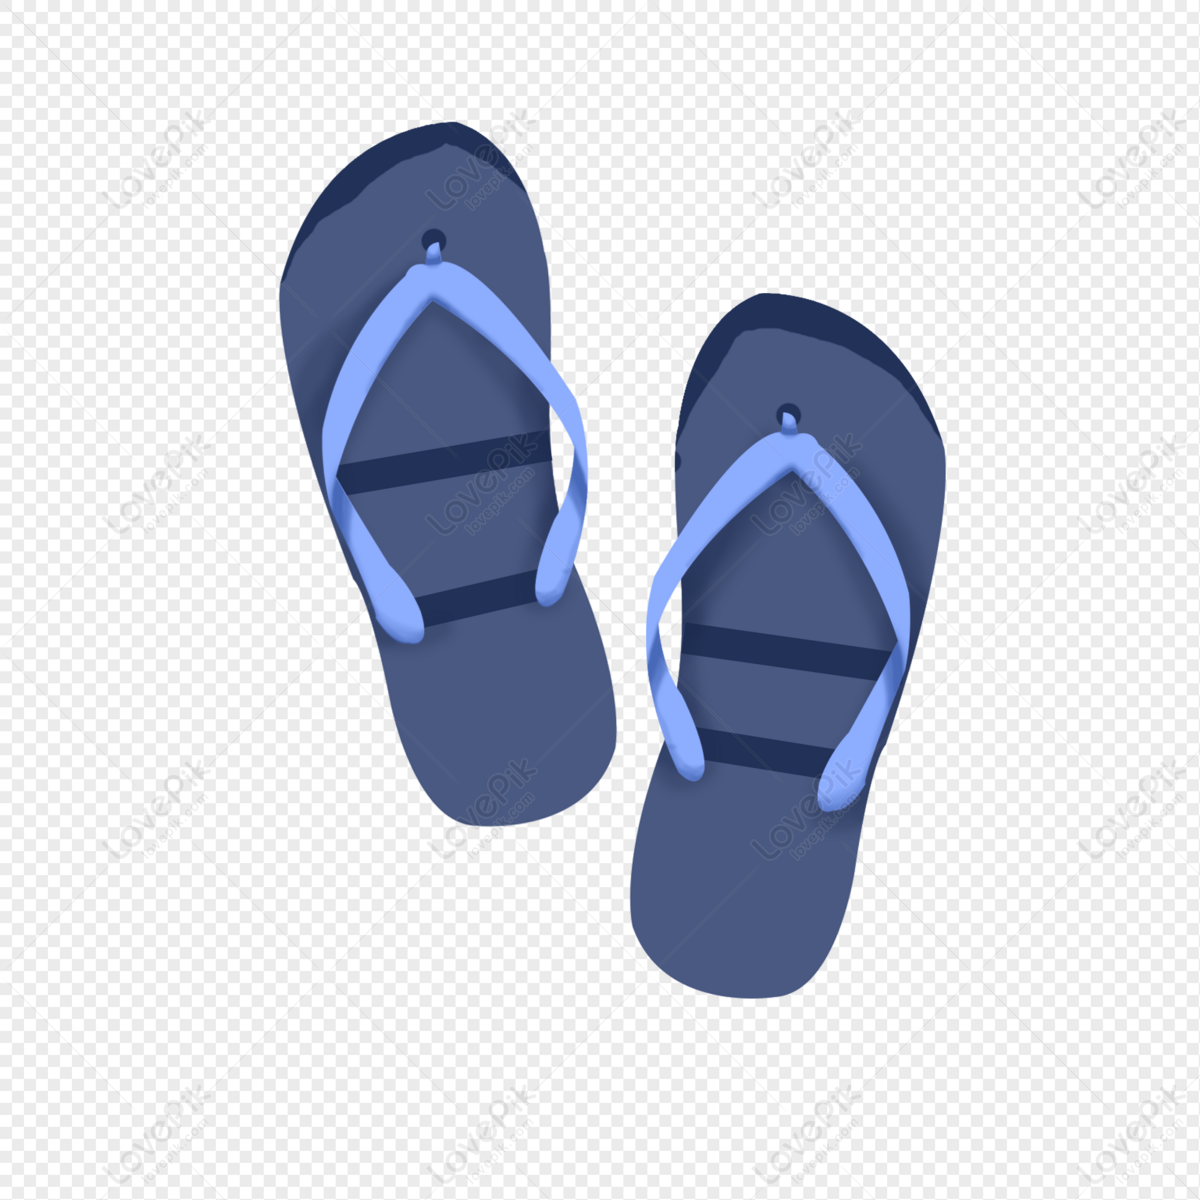 Slipper PNG Image And Clipart Image For Free Download - Lovepik | 401103918